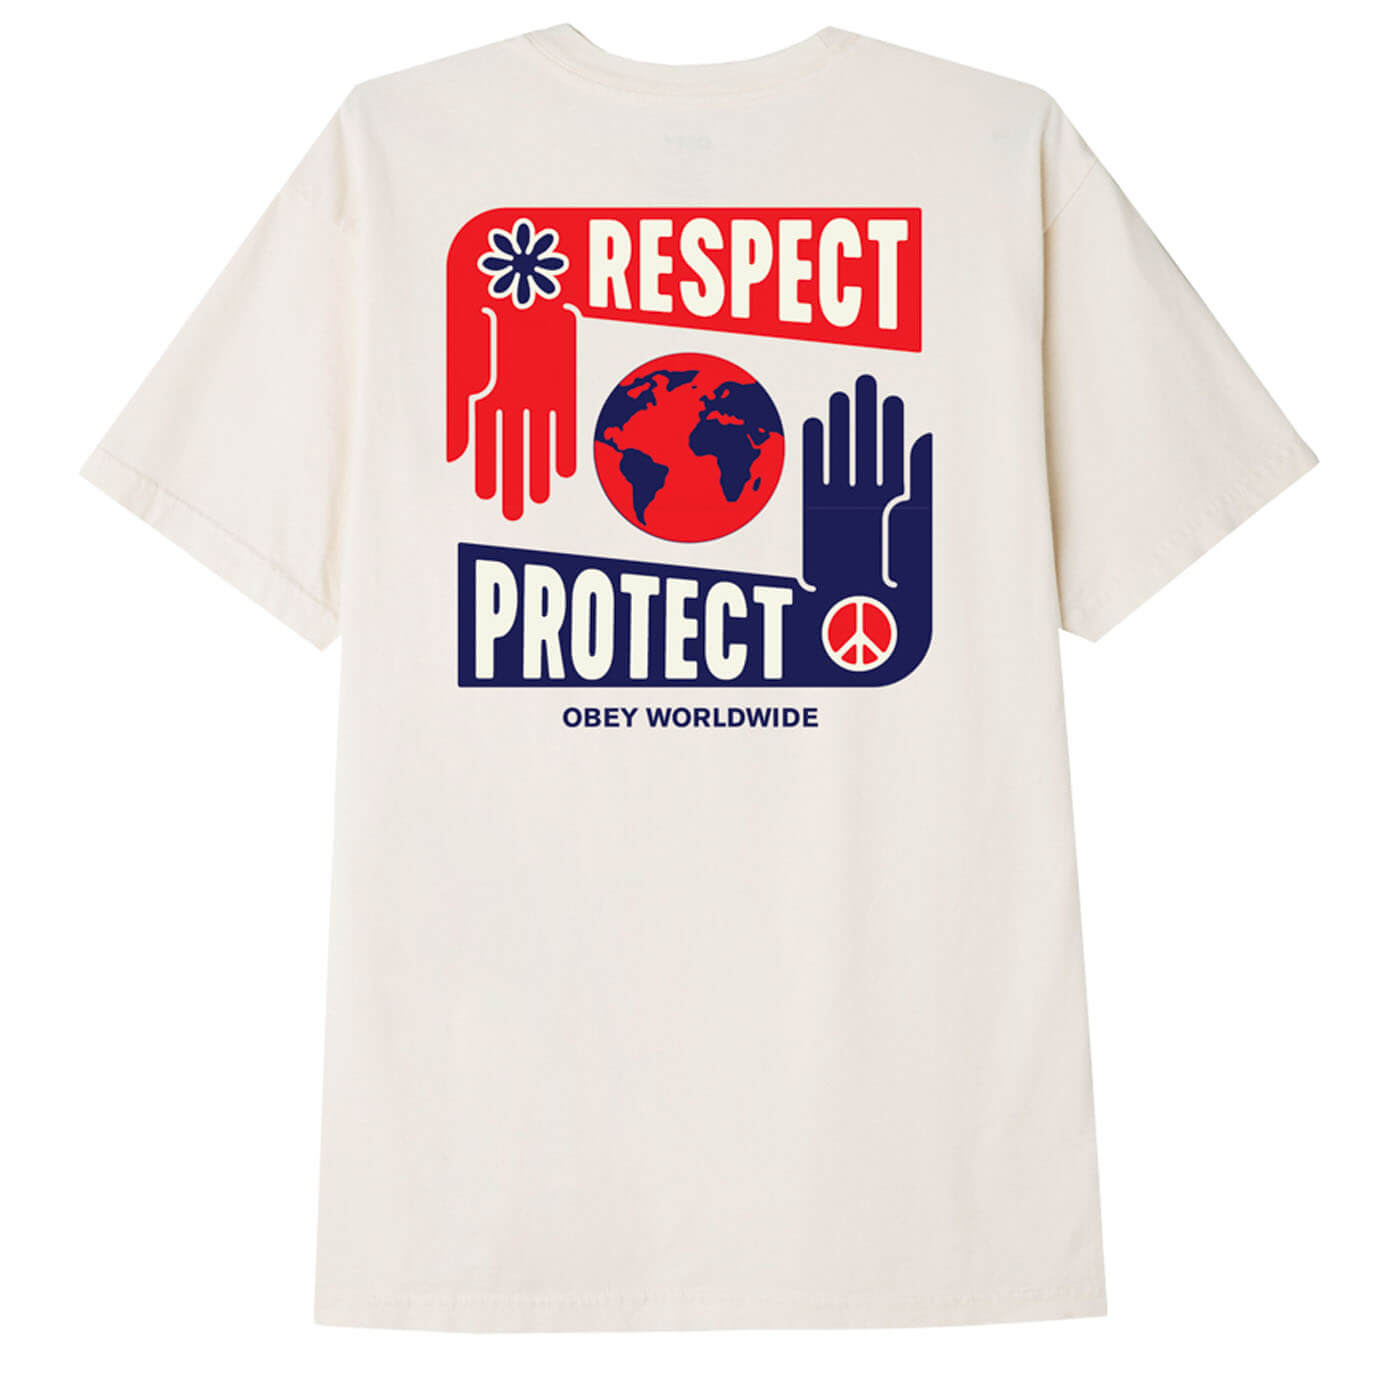 OBEY Respect Protect T-Shirt